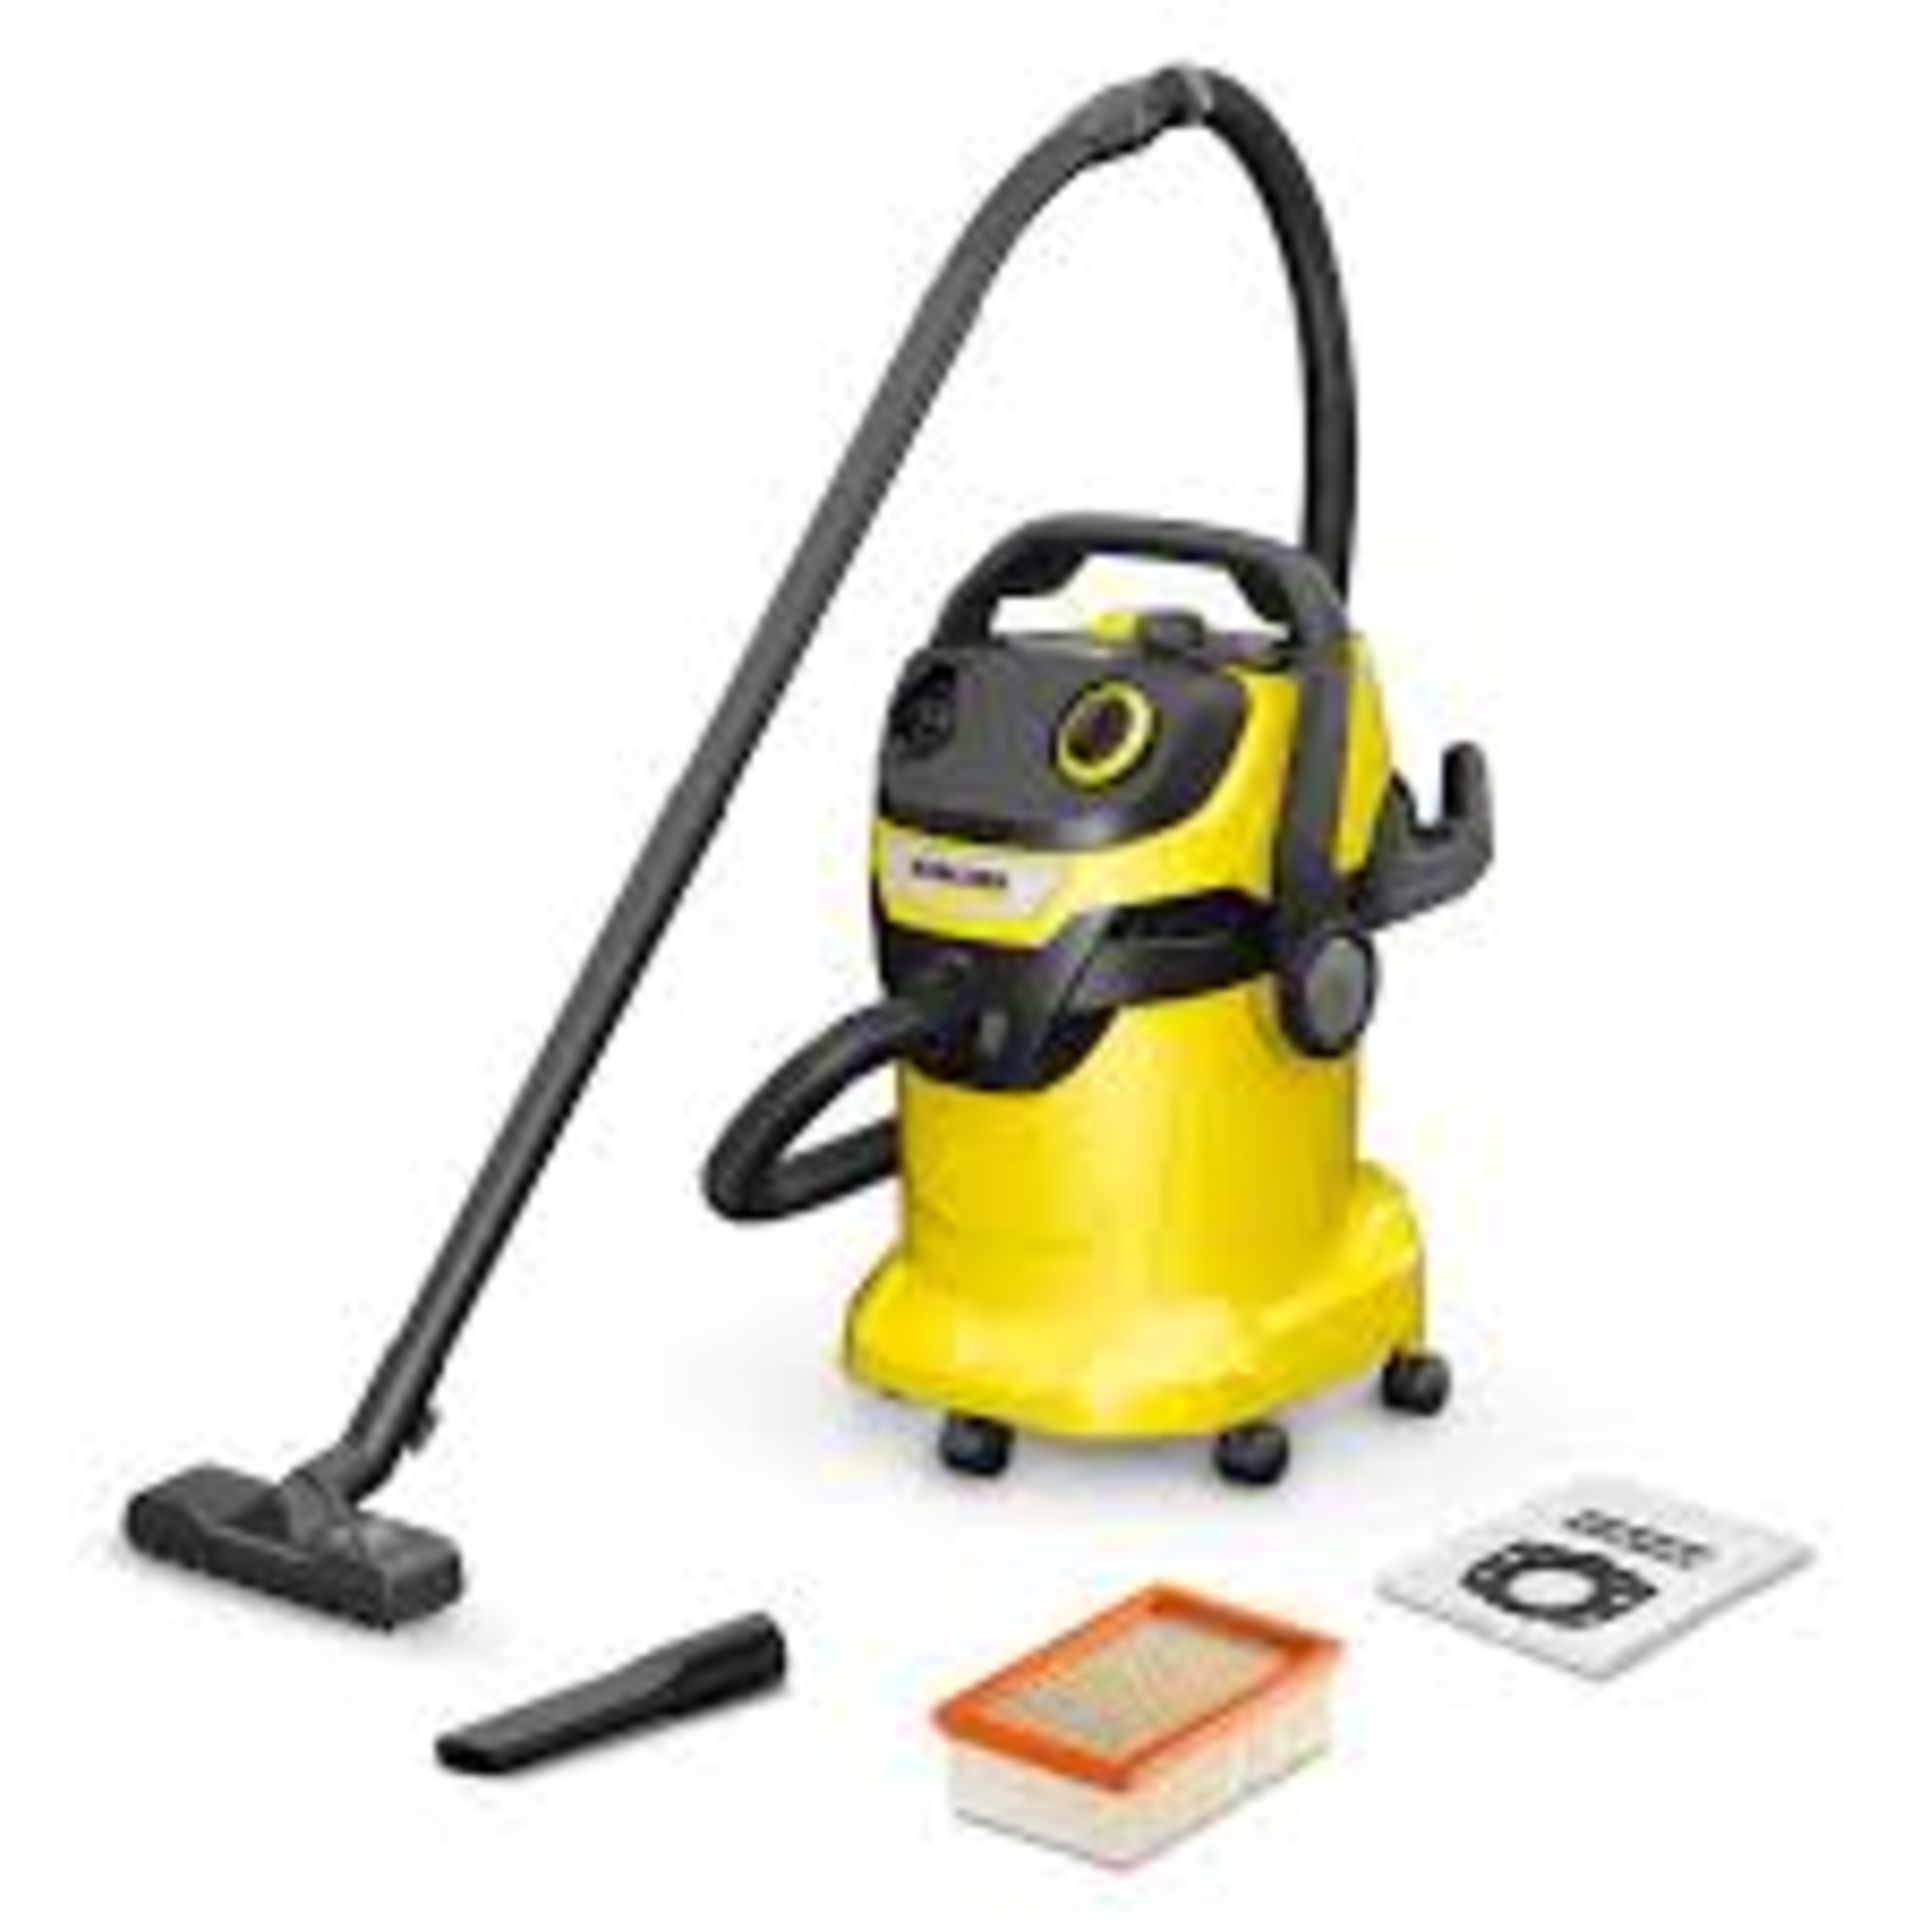 Kärcher WD 5 Corded Wet & dry vacuum, 25.00L. - P3. The Kärcher WD 5 takes on the jobs too tough for